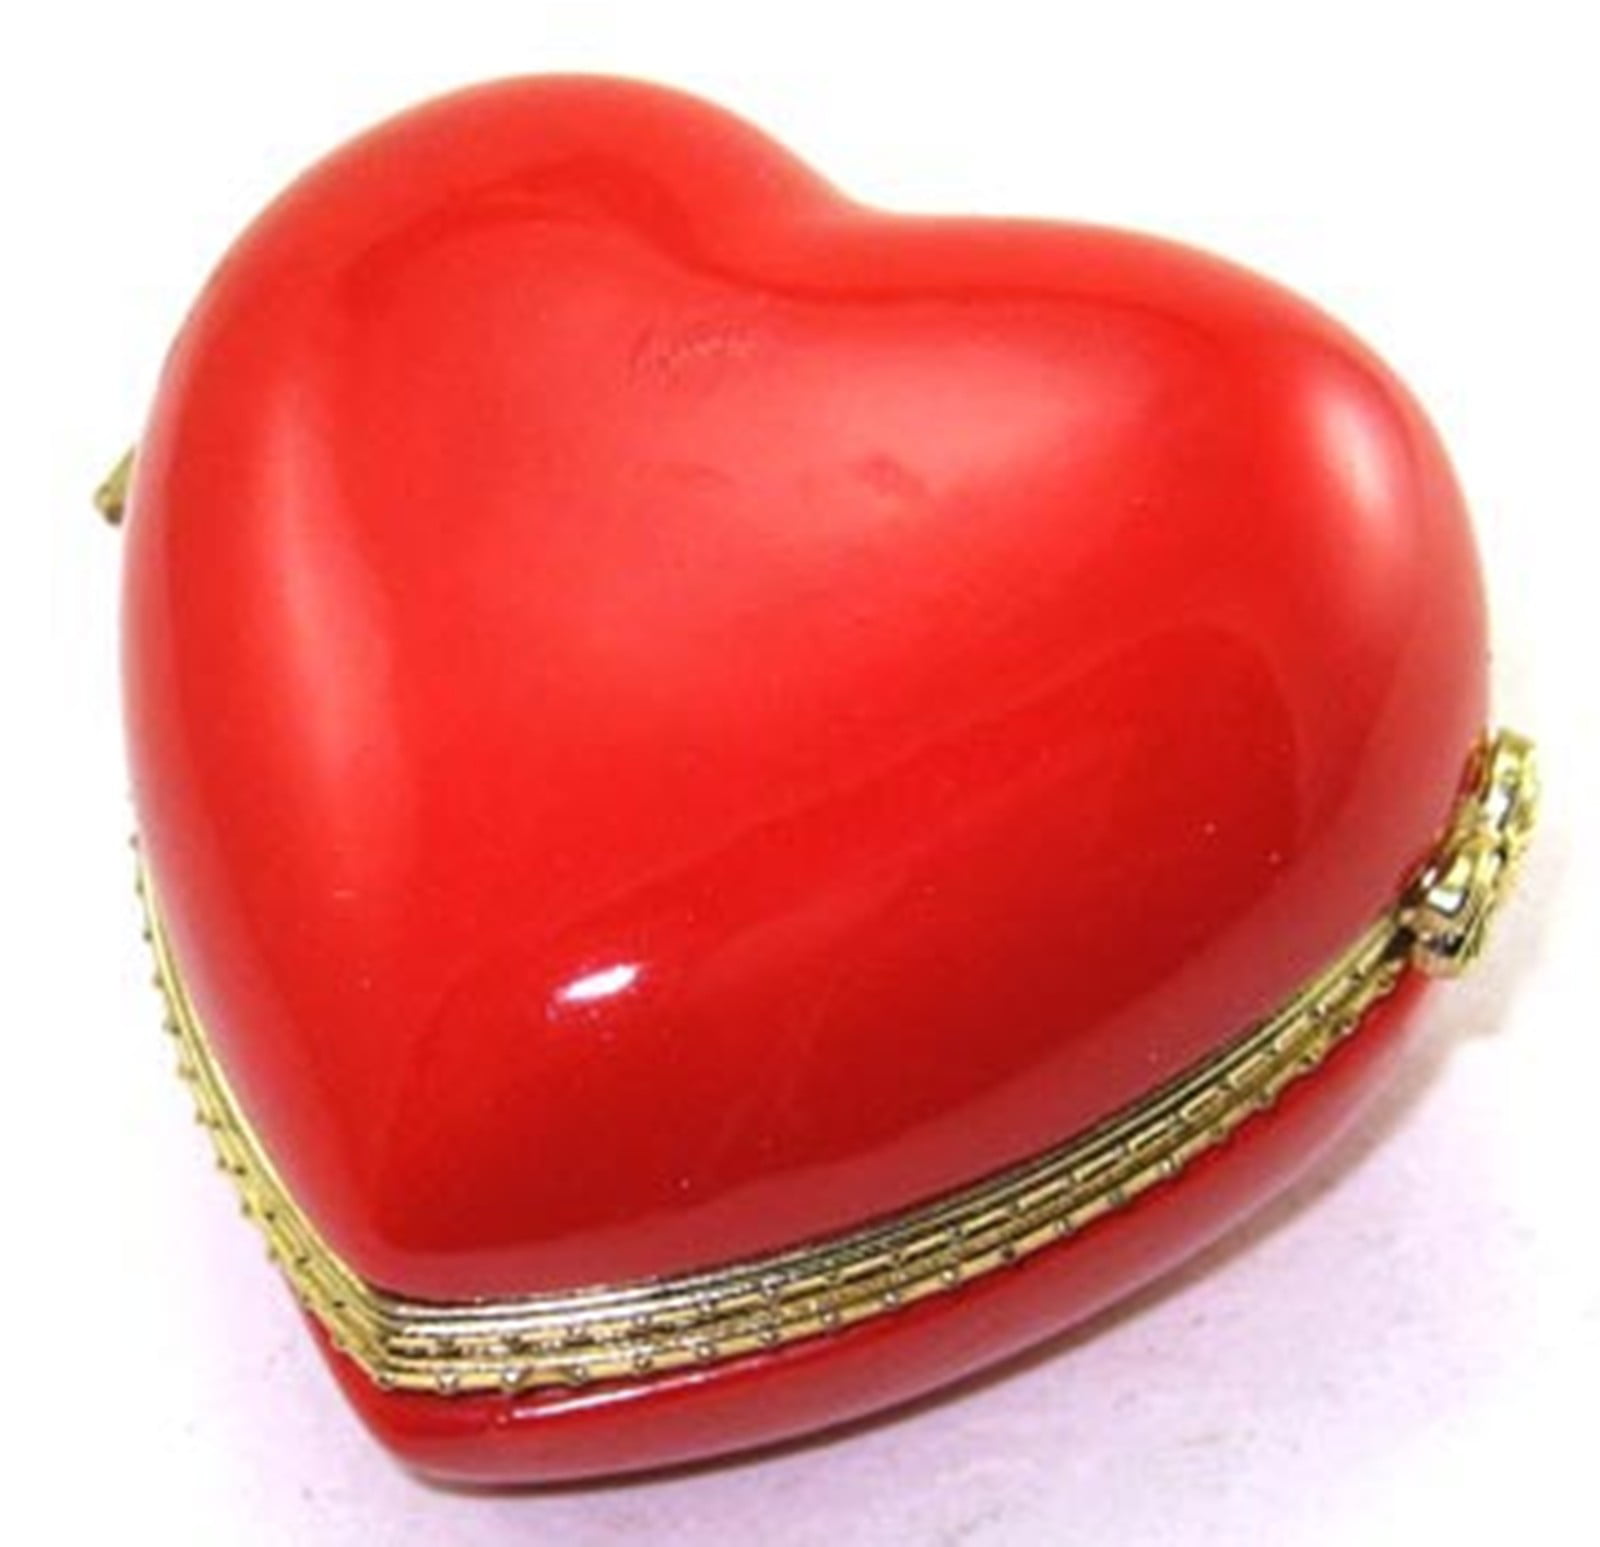 New ACRYLIC VALENTINE HEART COVERED CANDY DISH TRINKET JEWELRY BOX RED or PINK 